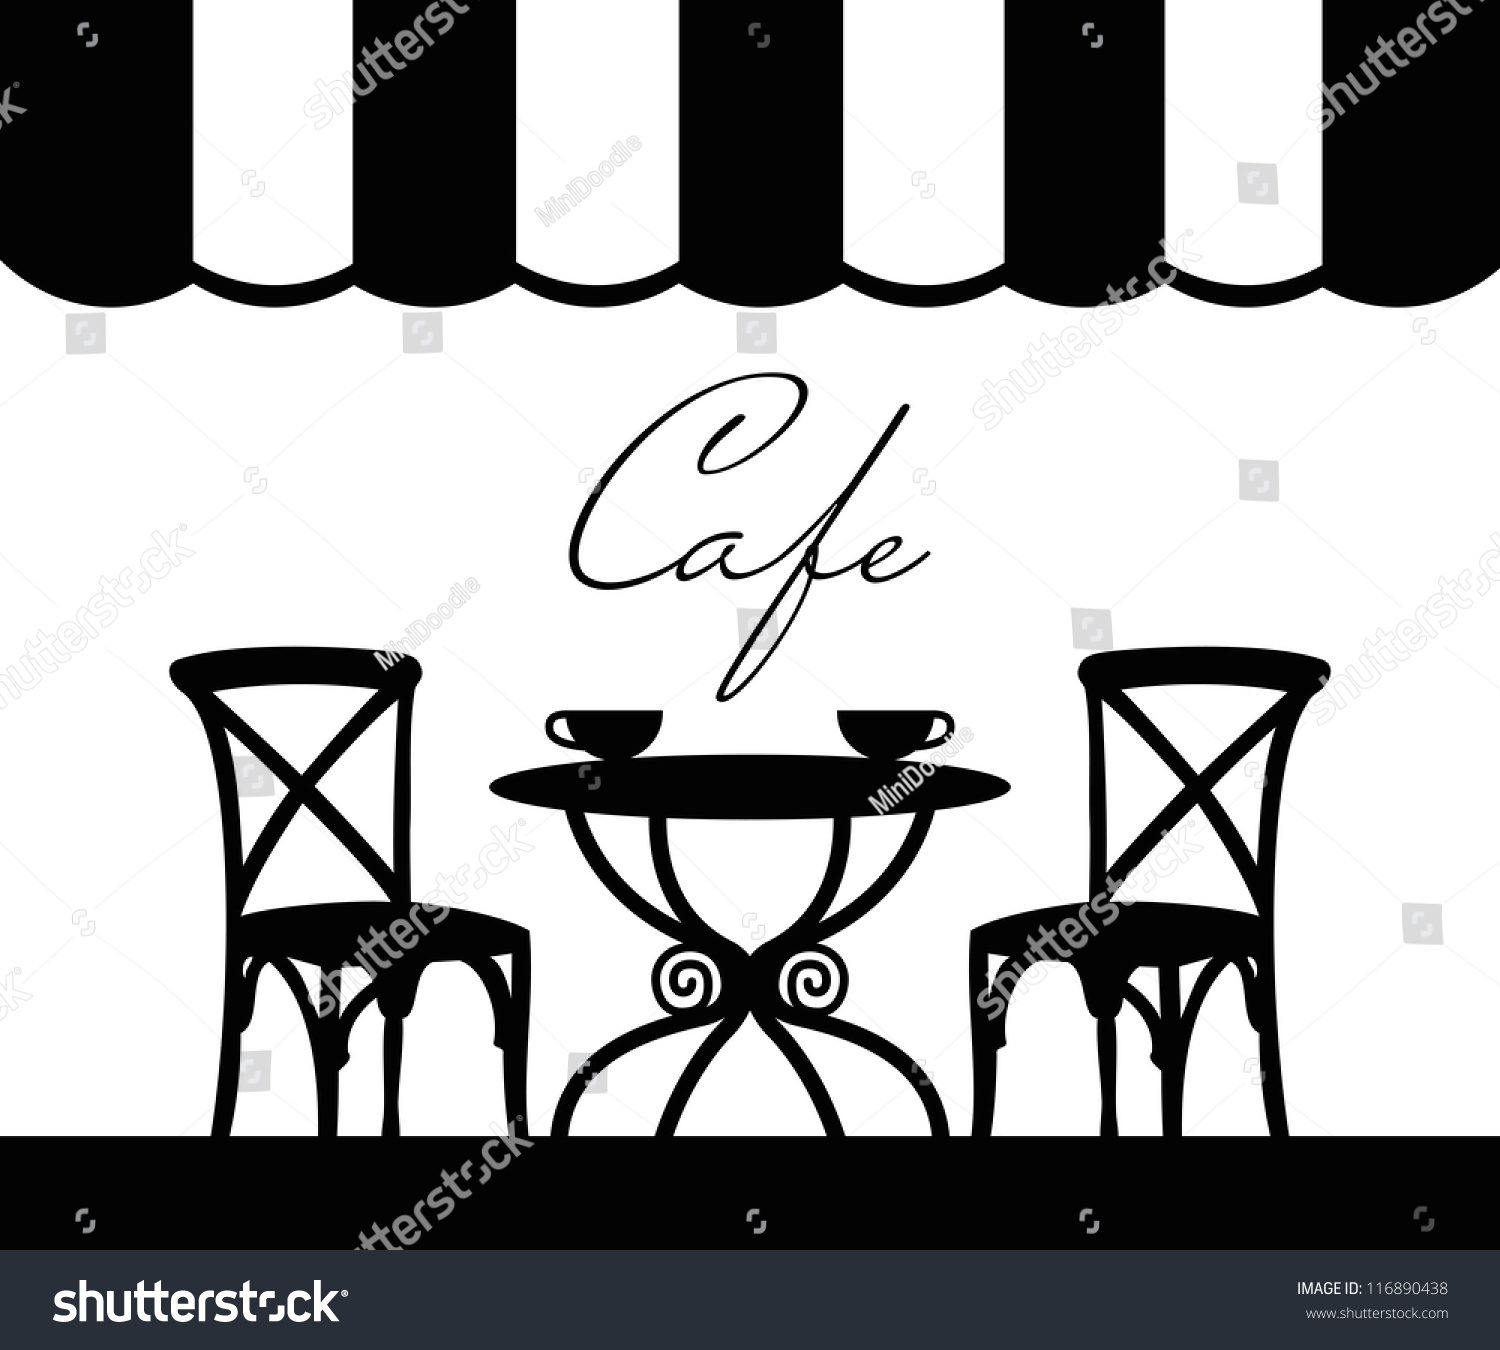 french cafe clipart - photo #19